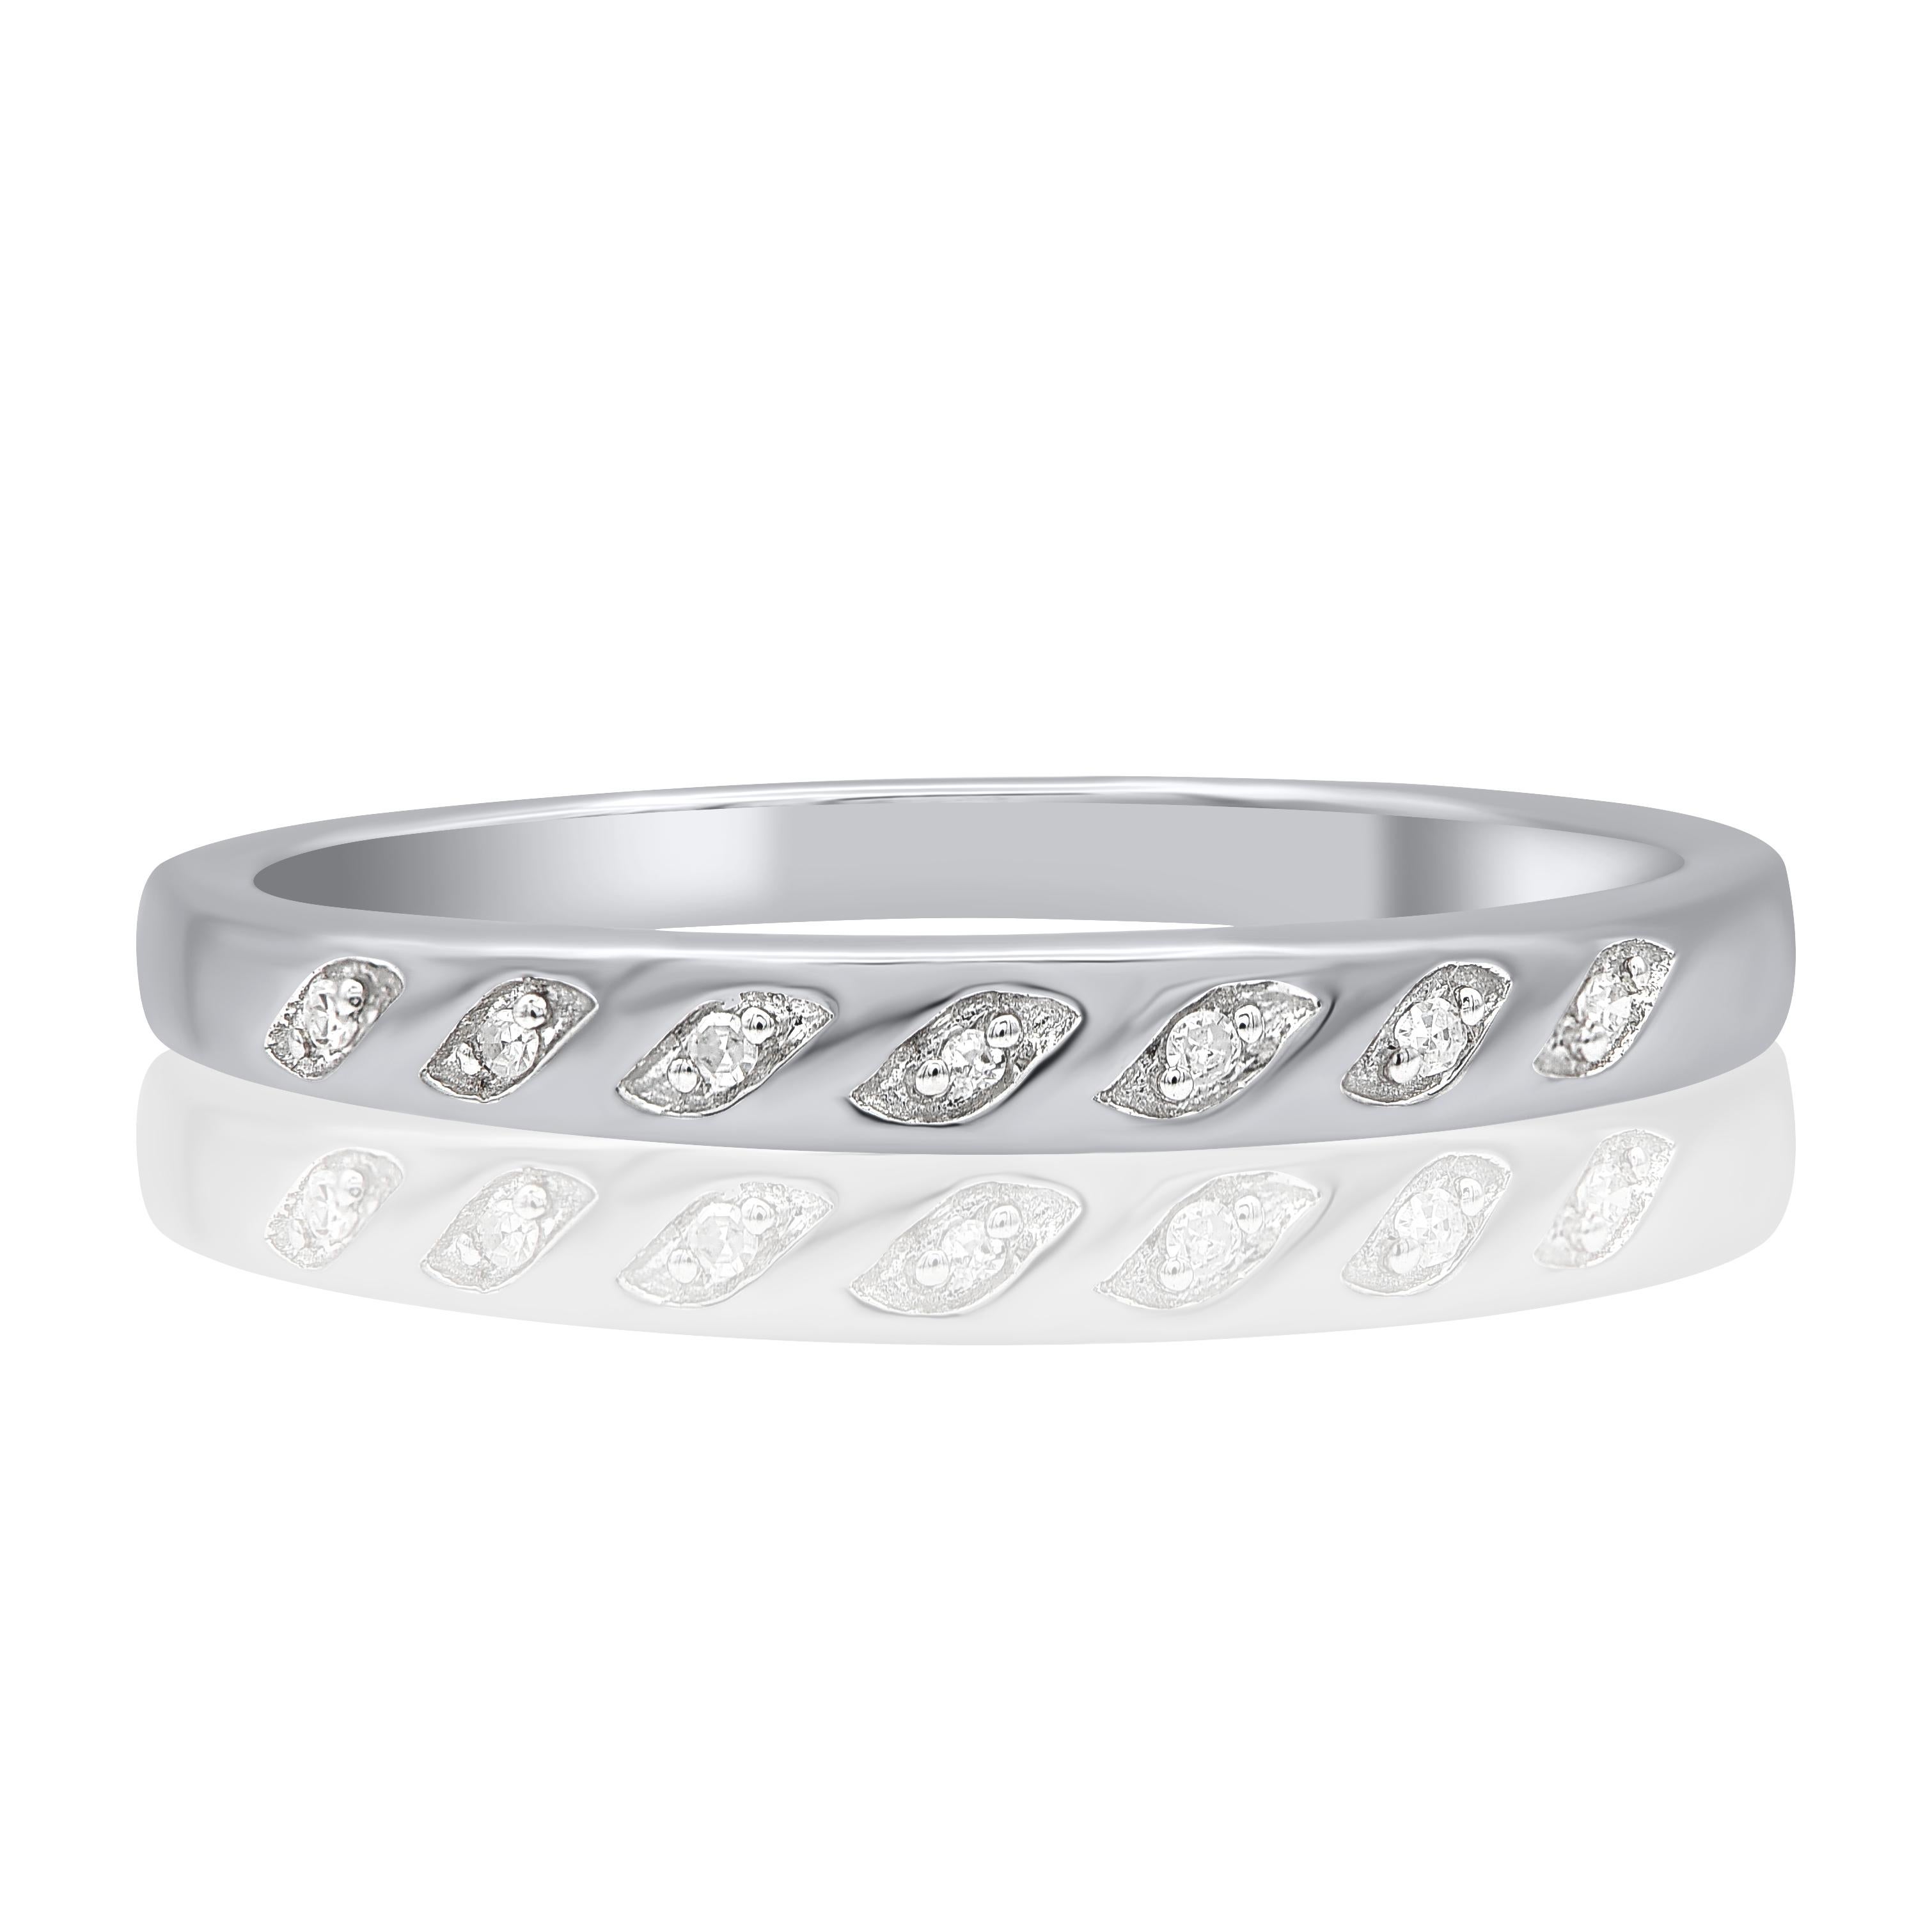 Bring charm to your look with this diamond wedding band Ring. This ring is beautifully crafted in 14 Karat white gold and embedded with 7 natural single cut diamonds in pave setting. Total diamond weight is 0.02 carat. The diamonds are graded as H-I